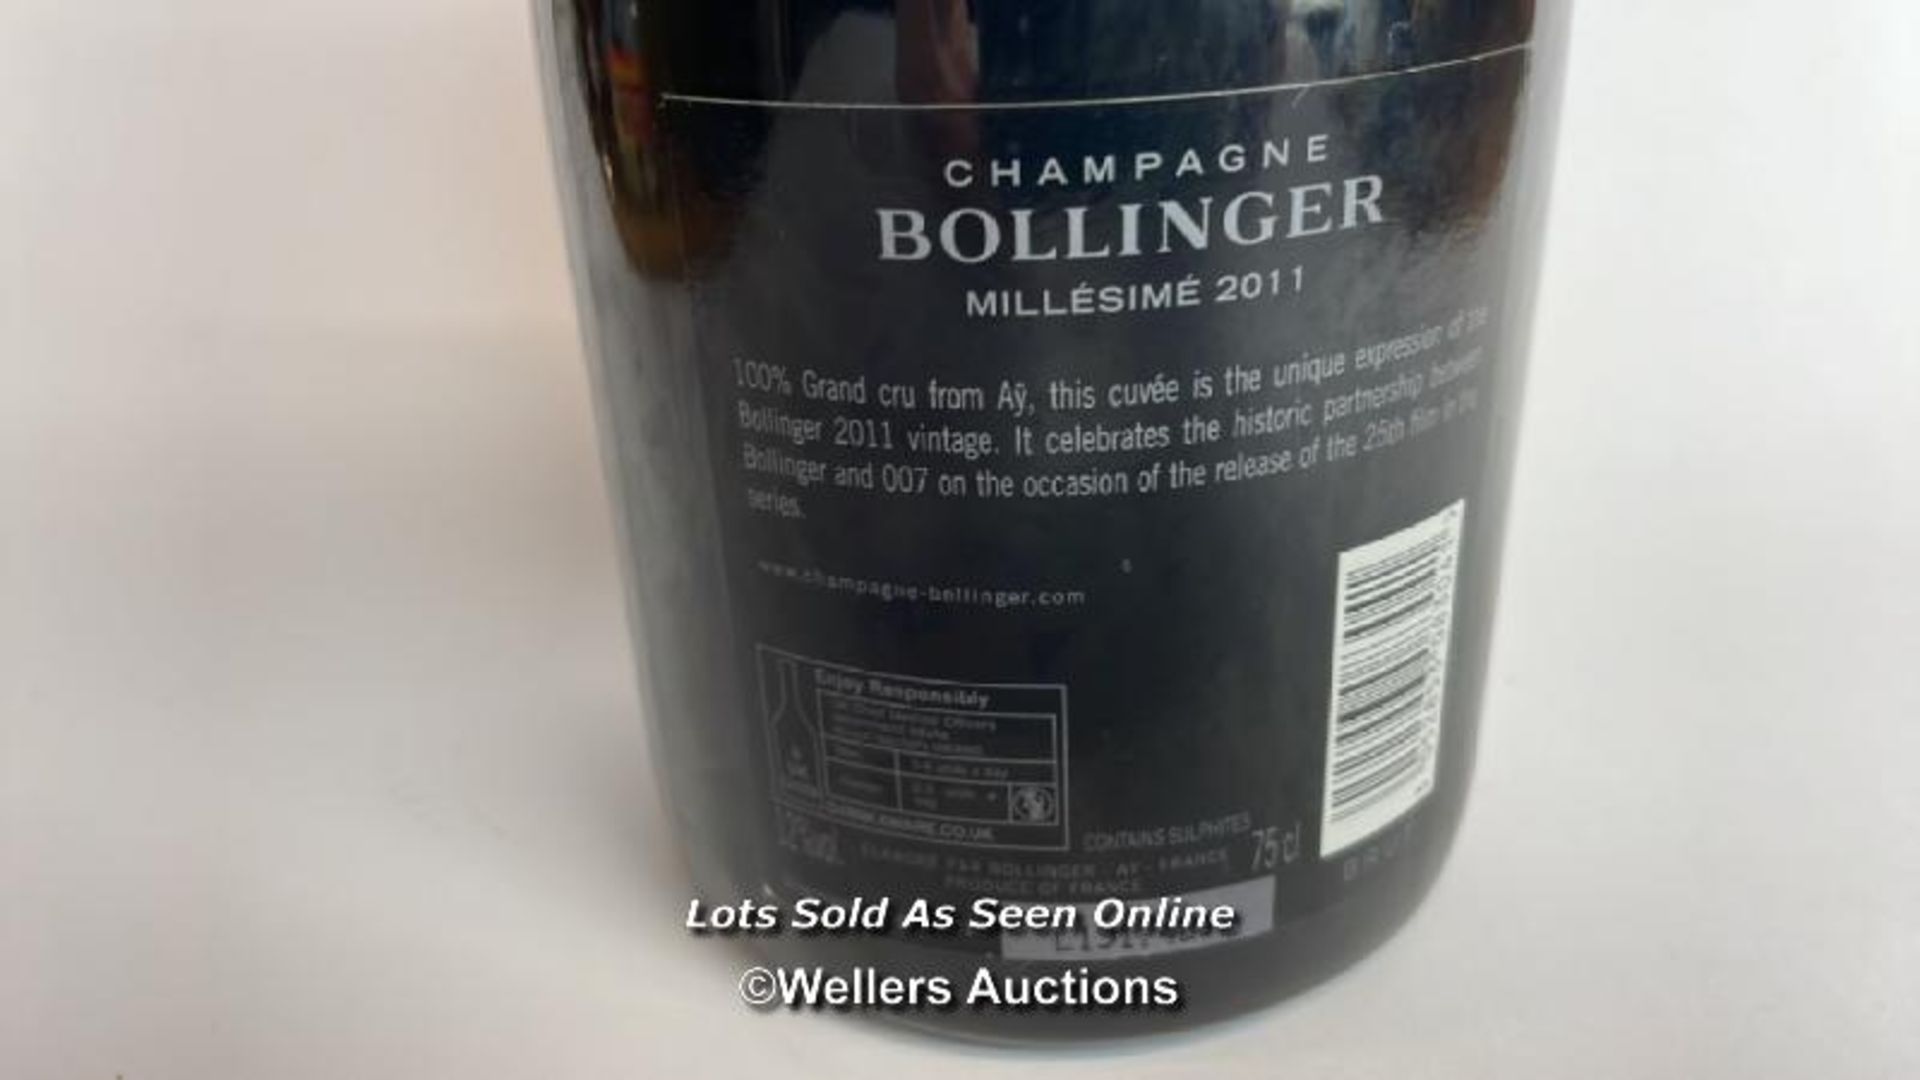 2011 007 Bollinger Champagne, Millesime, 75cl, 12% vol / Please see images for fill level and - Image 6 of 8